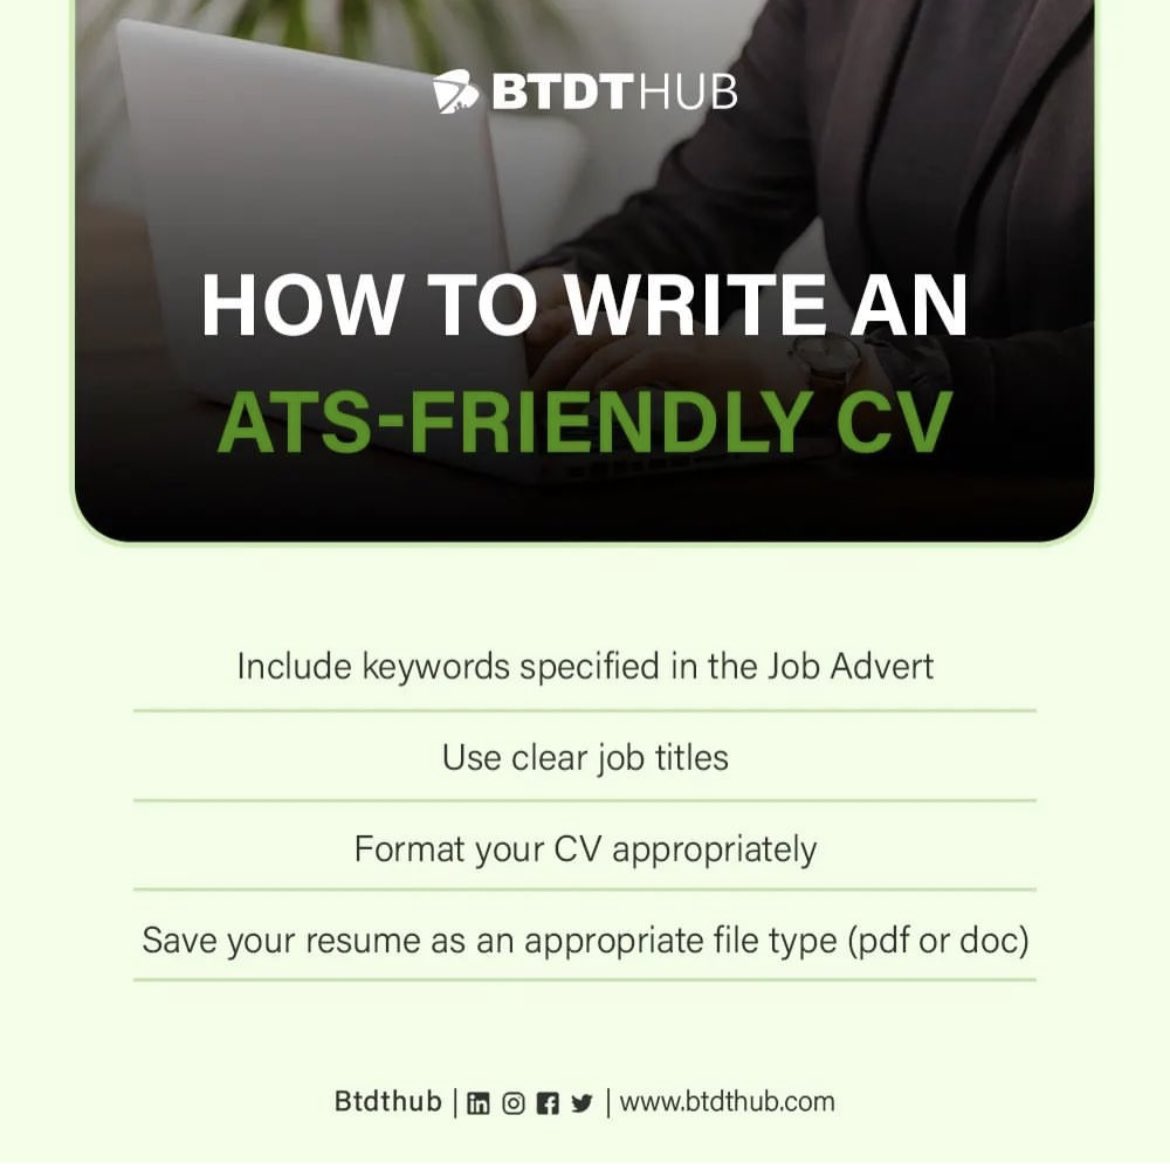 Do you know that the Applicant Tracking System (ATS) scans CVs to help recruiters select suitable candidates? Let us help you review your CV, Cover Letter and LinkedIn Profile to pass the ATS test and position you for your next job. Send a DM or an email to INFO@BTDTHUB.COM